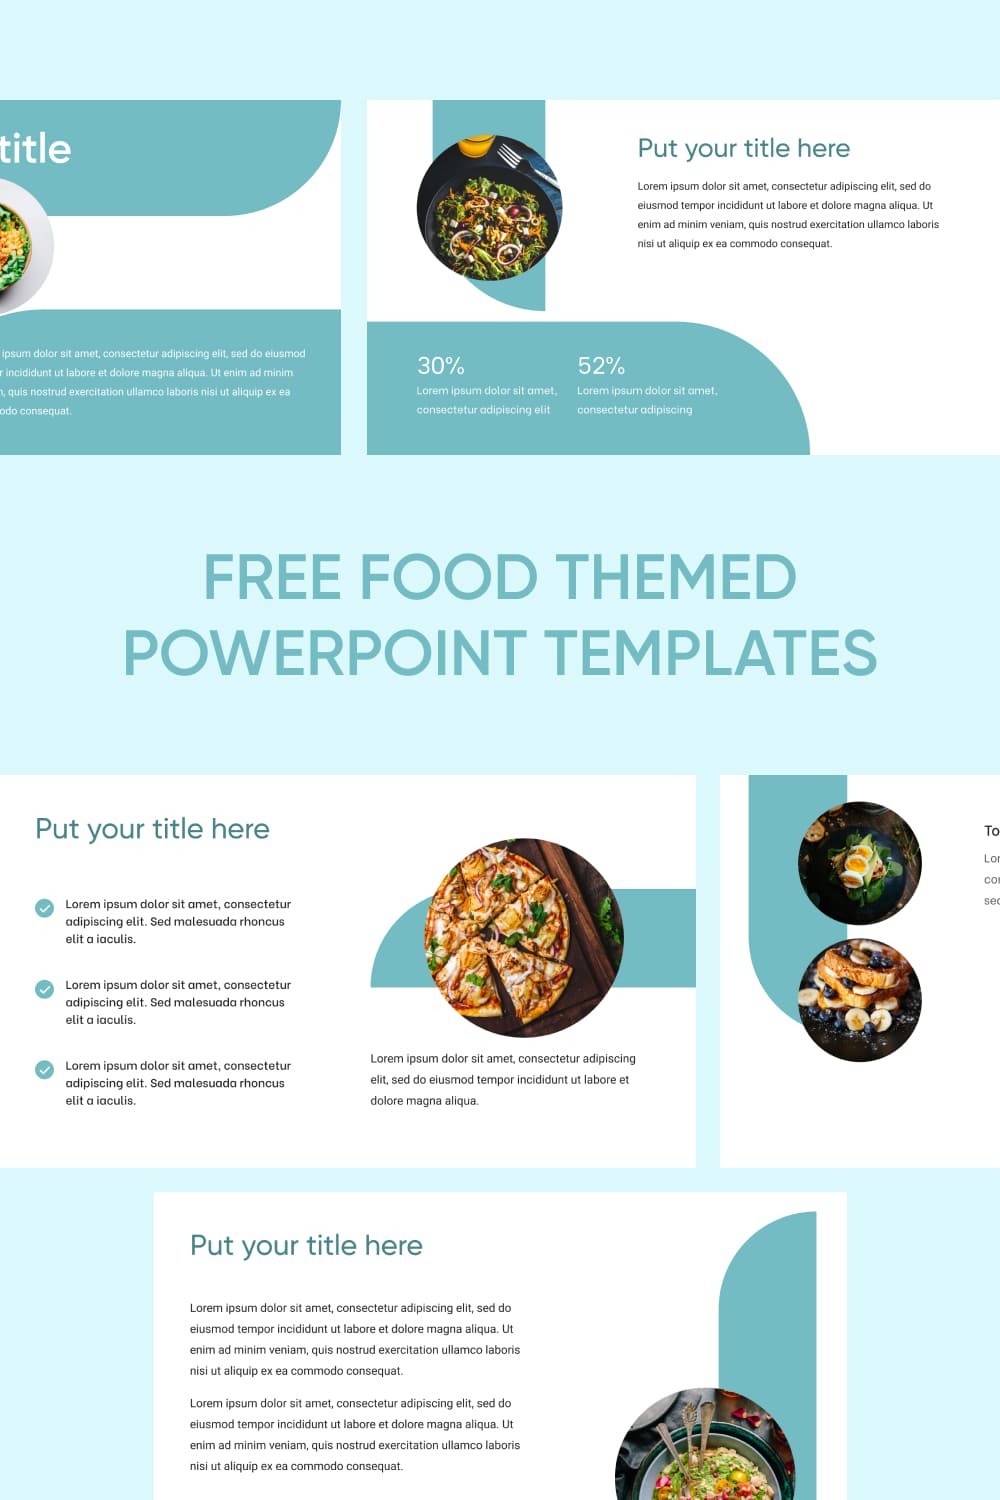 Pinterest Free Food Themed Powerpoint Templates.